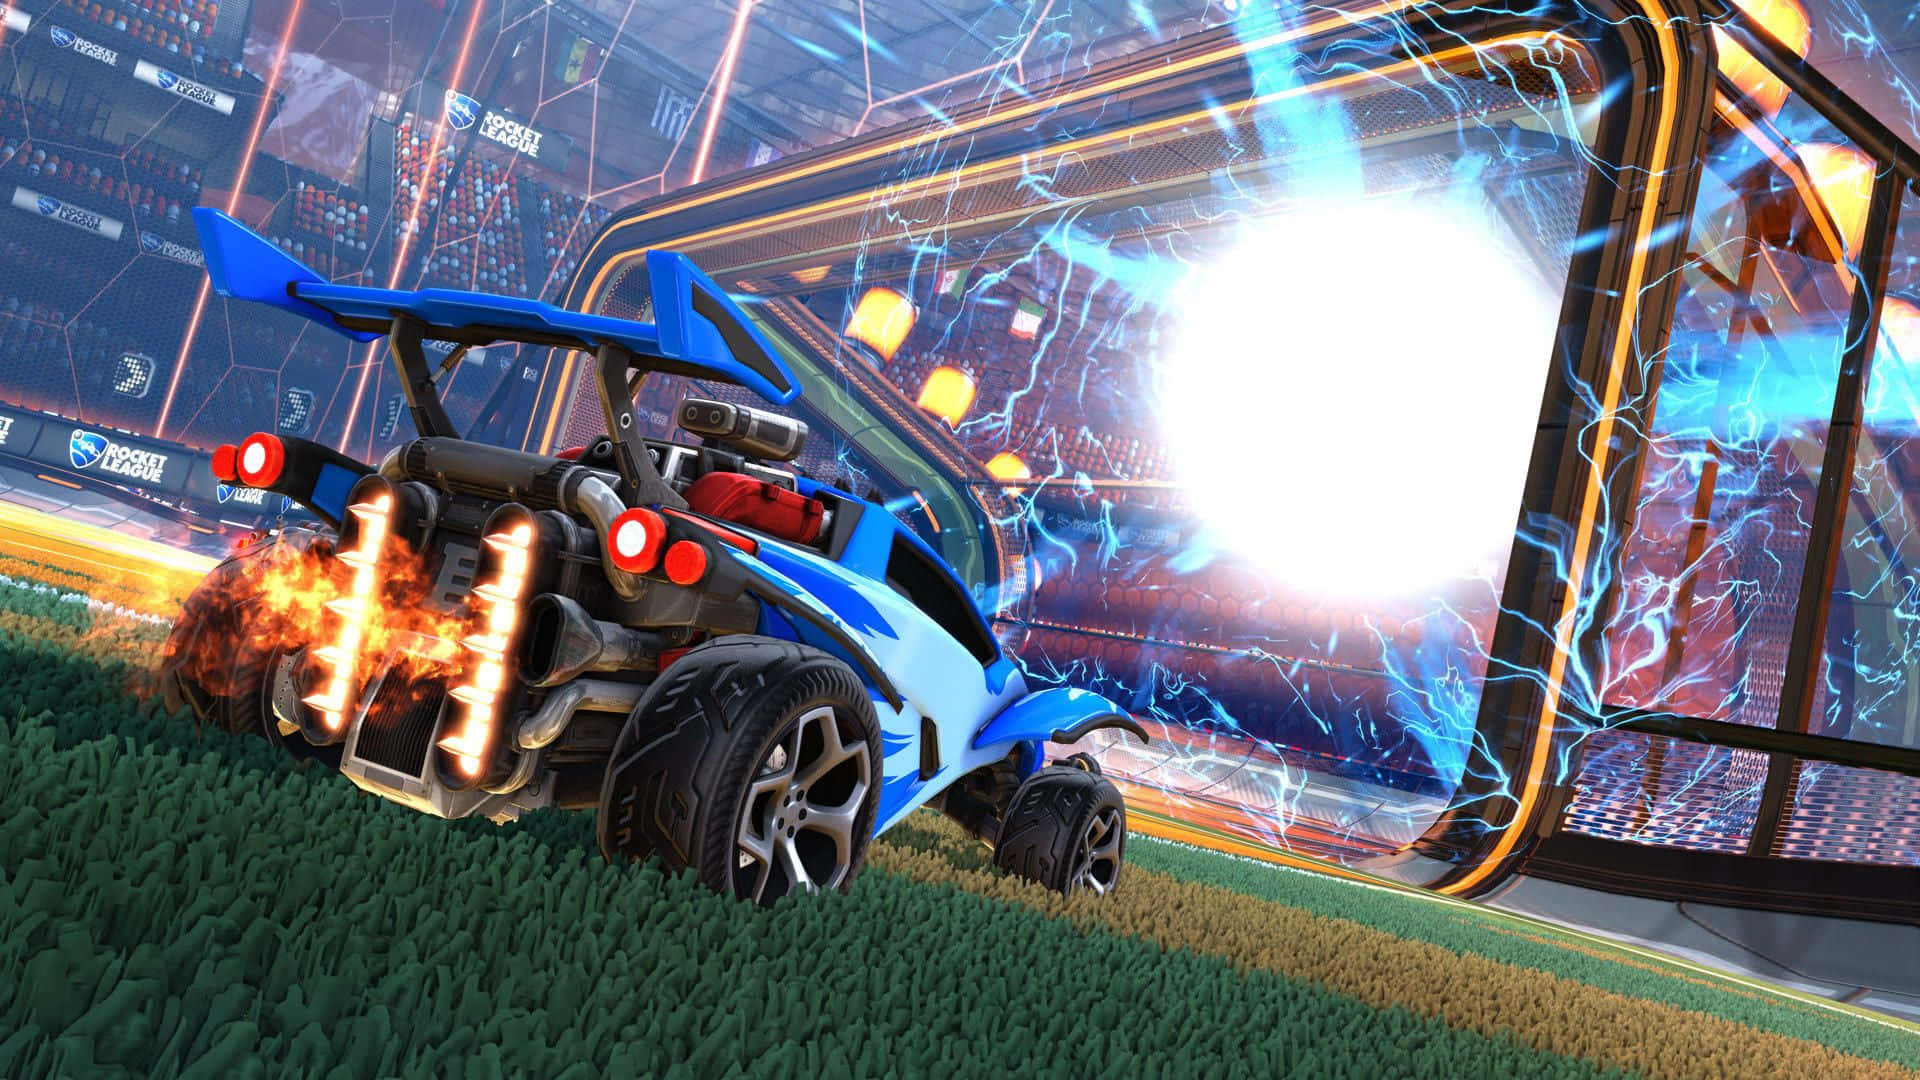 Red and Blue cars boost through a neon-lit stadium in Rocket League.